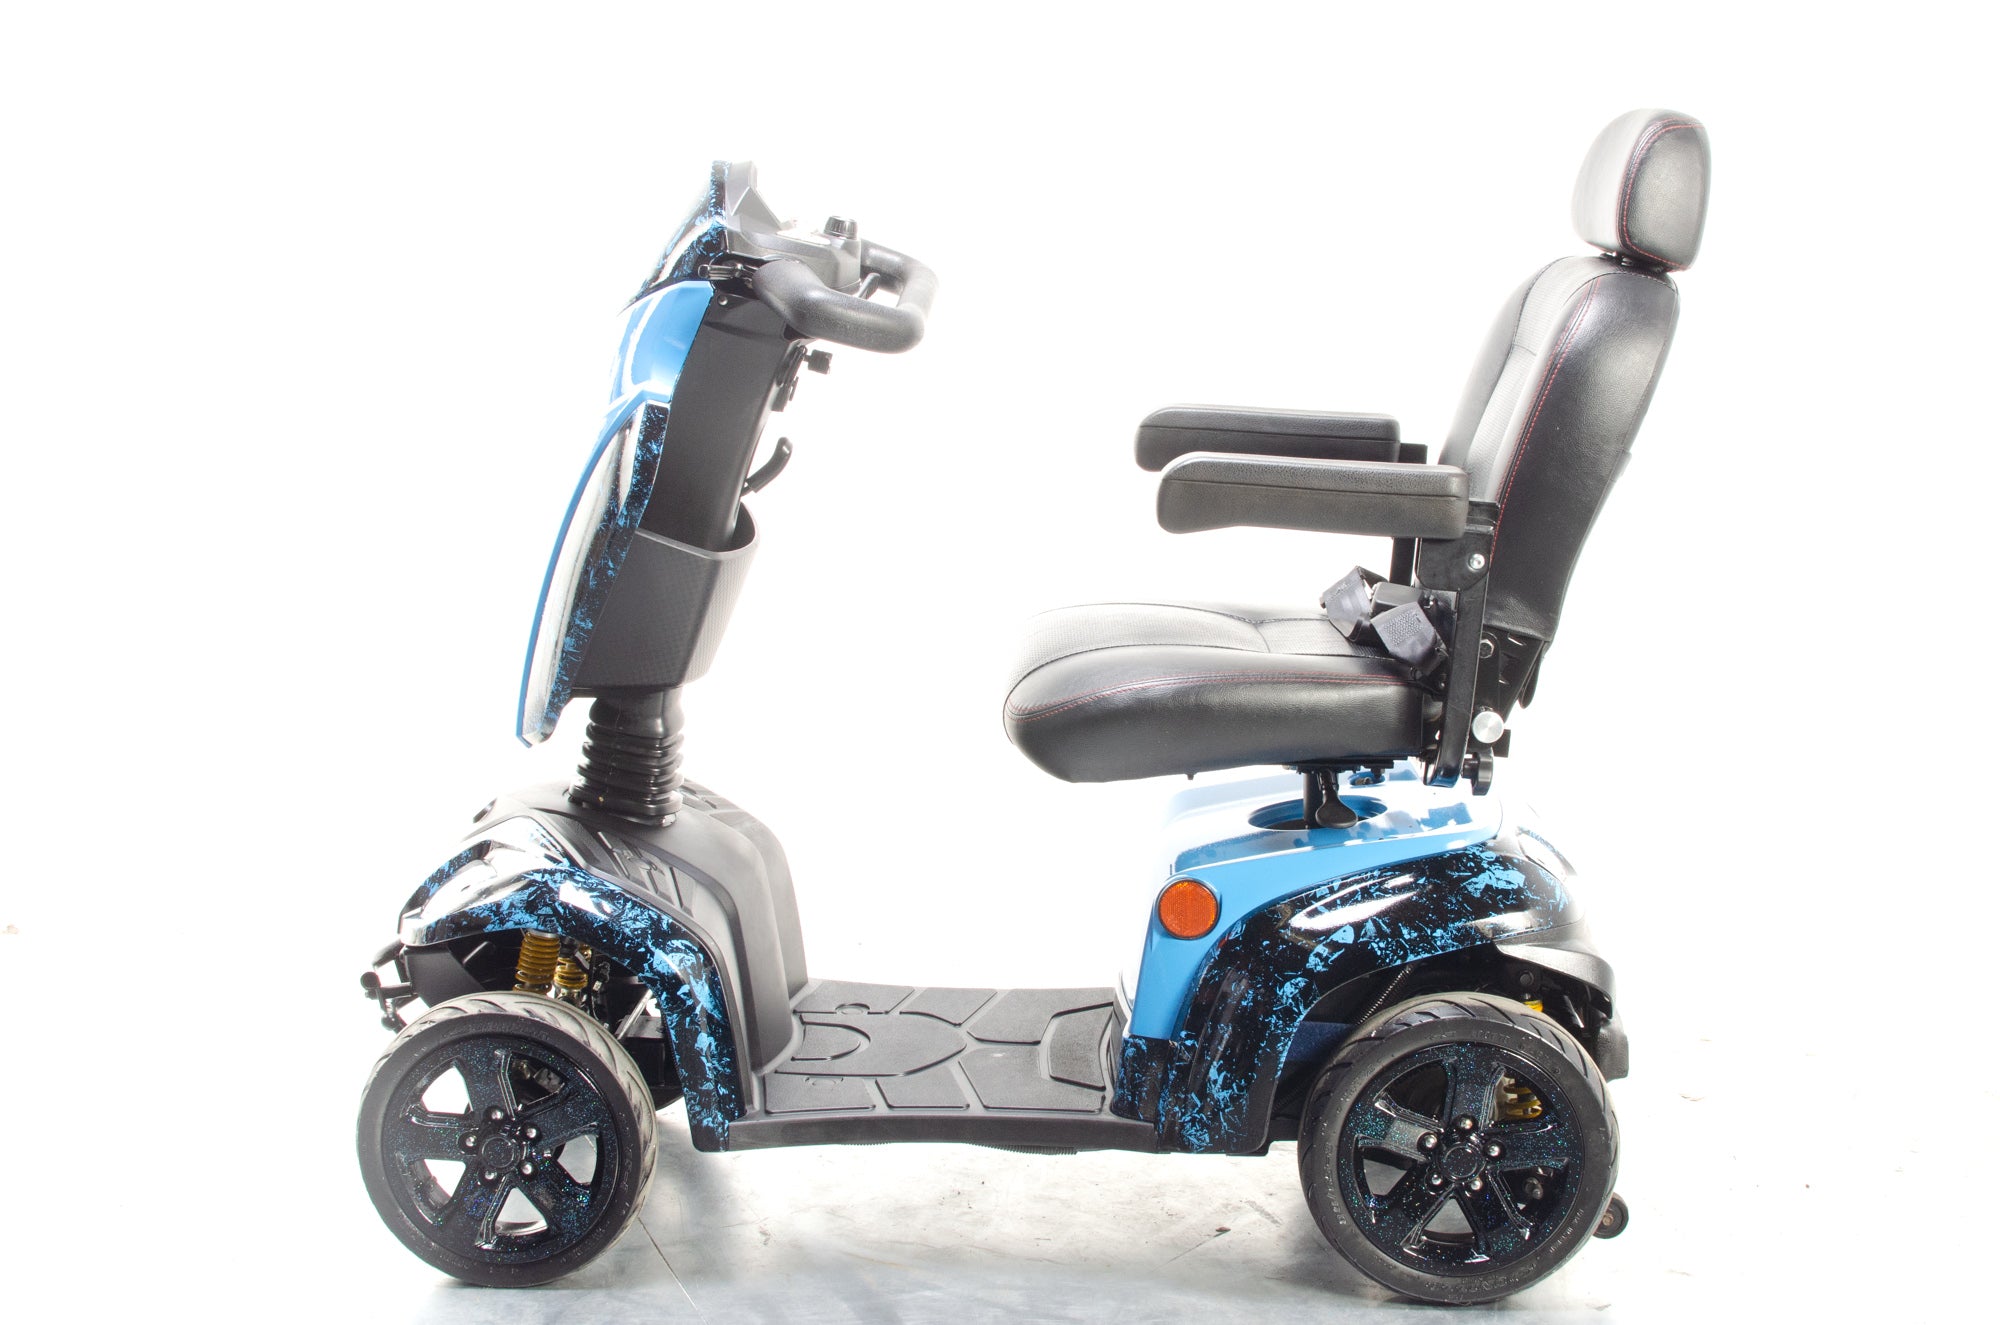 Kymco Agility 8mph Electric Mobility Scooter Road Large All-Terrain